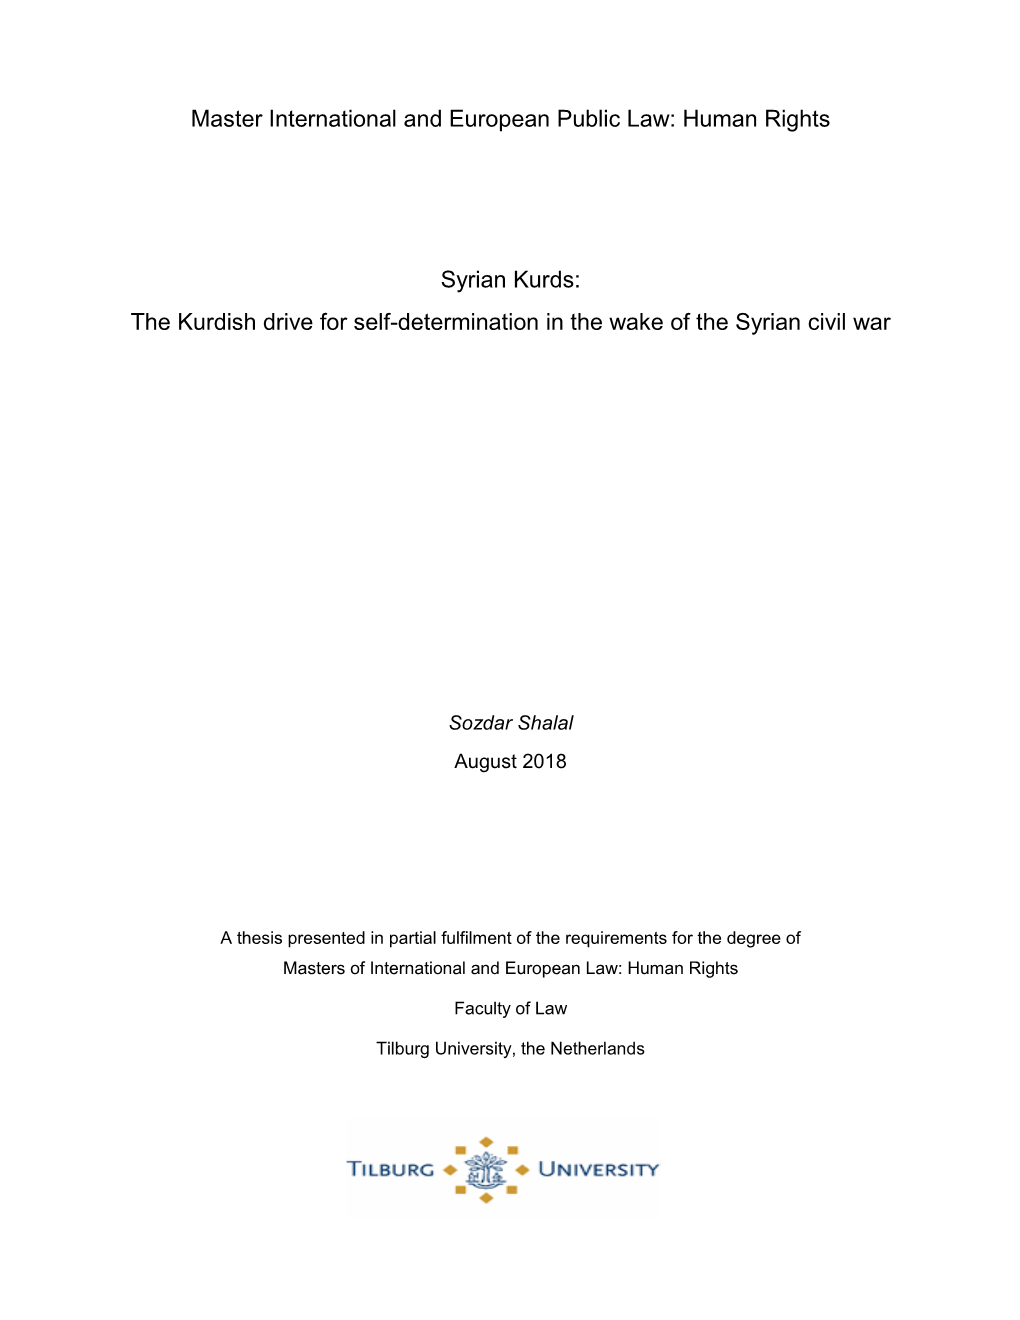 Human Rights Syrian Kurds: the Kurdish Drive for Self-Determination in the Wake Of